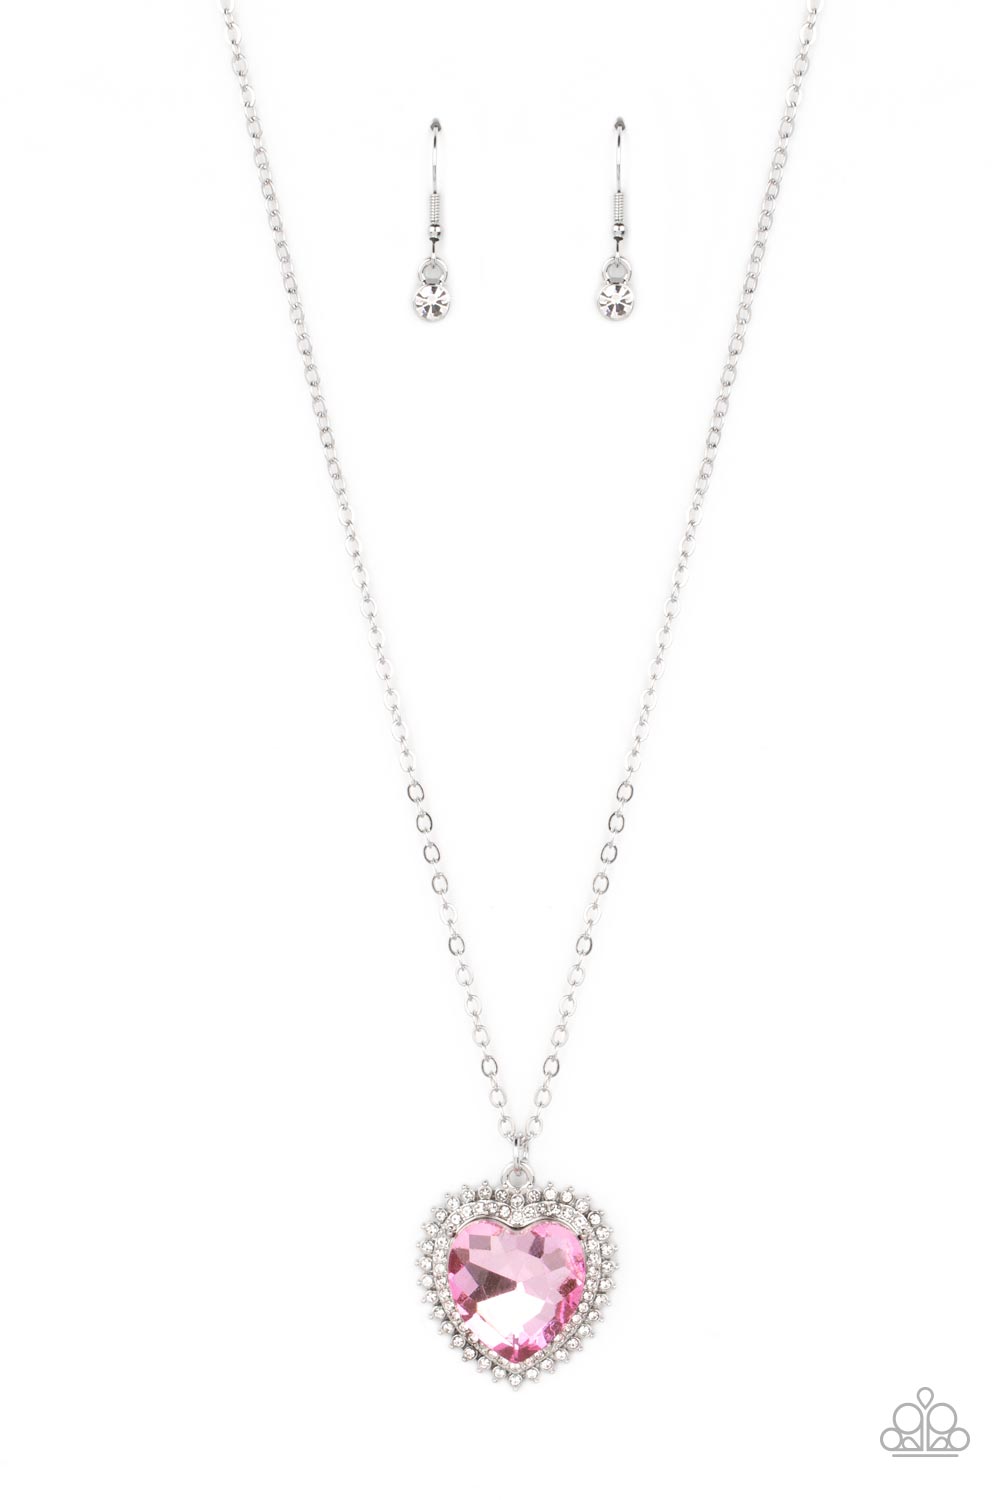 Sweethearts Stroll Pink Rhinestone Heart Necklace - Paparazzi Accessories- lightbox - CarasShop.com - $5 Jewelry by Cara Jewels